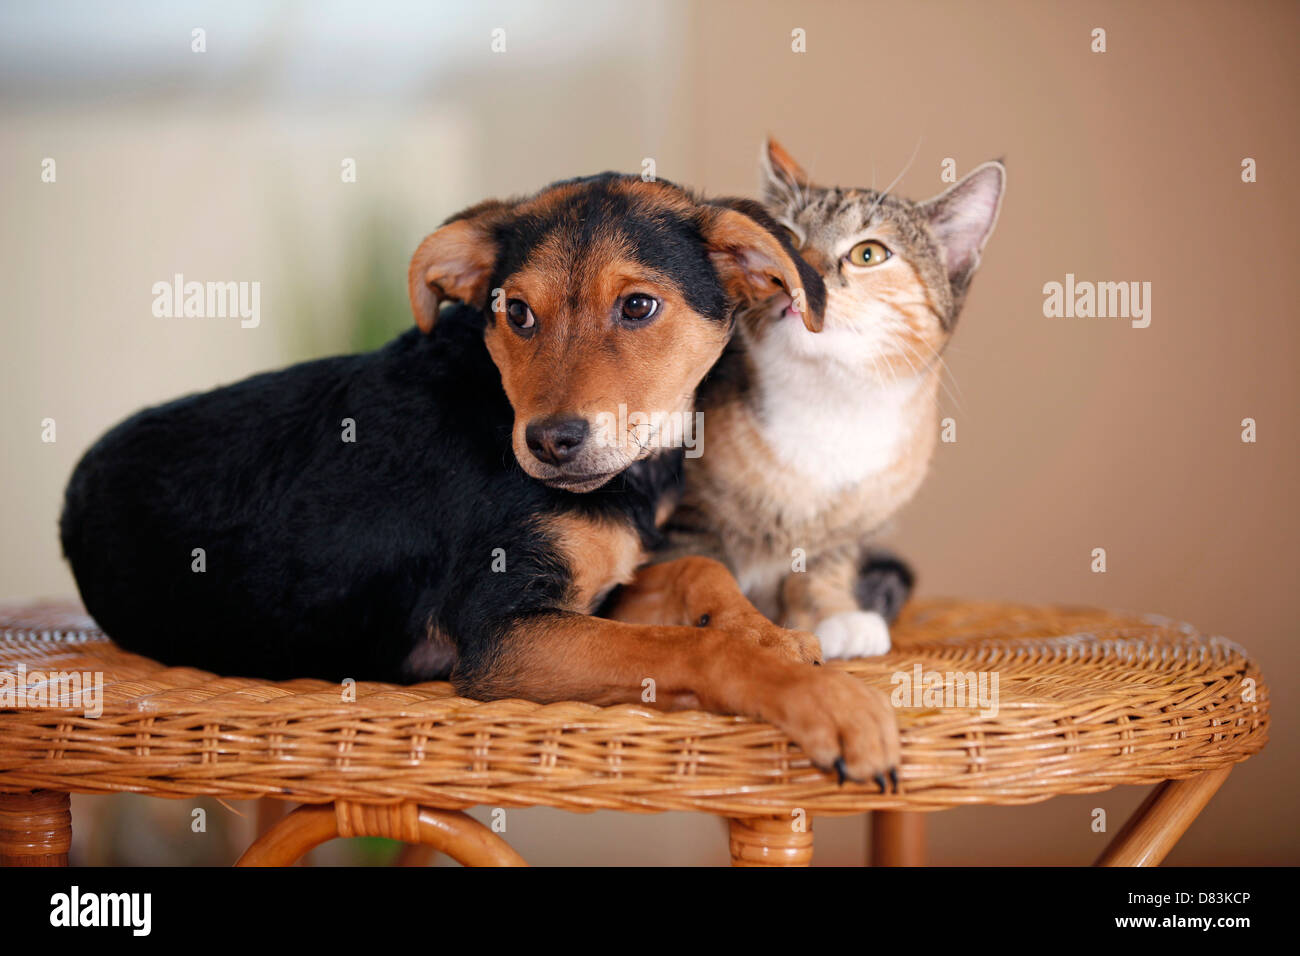 cat and dog Stock Photo